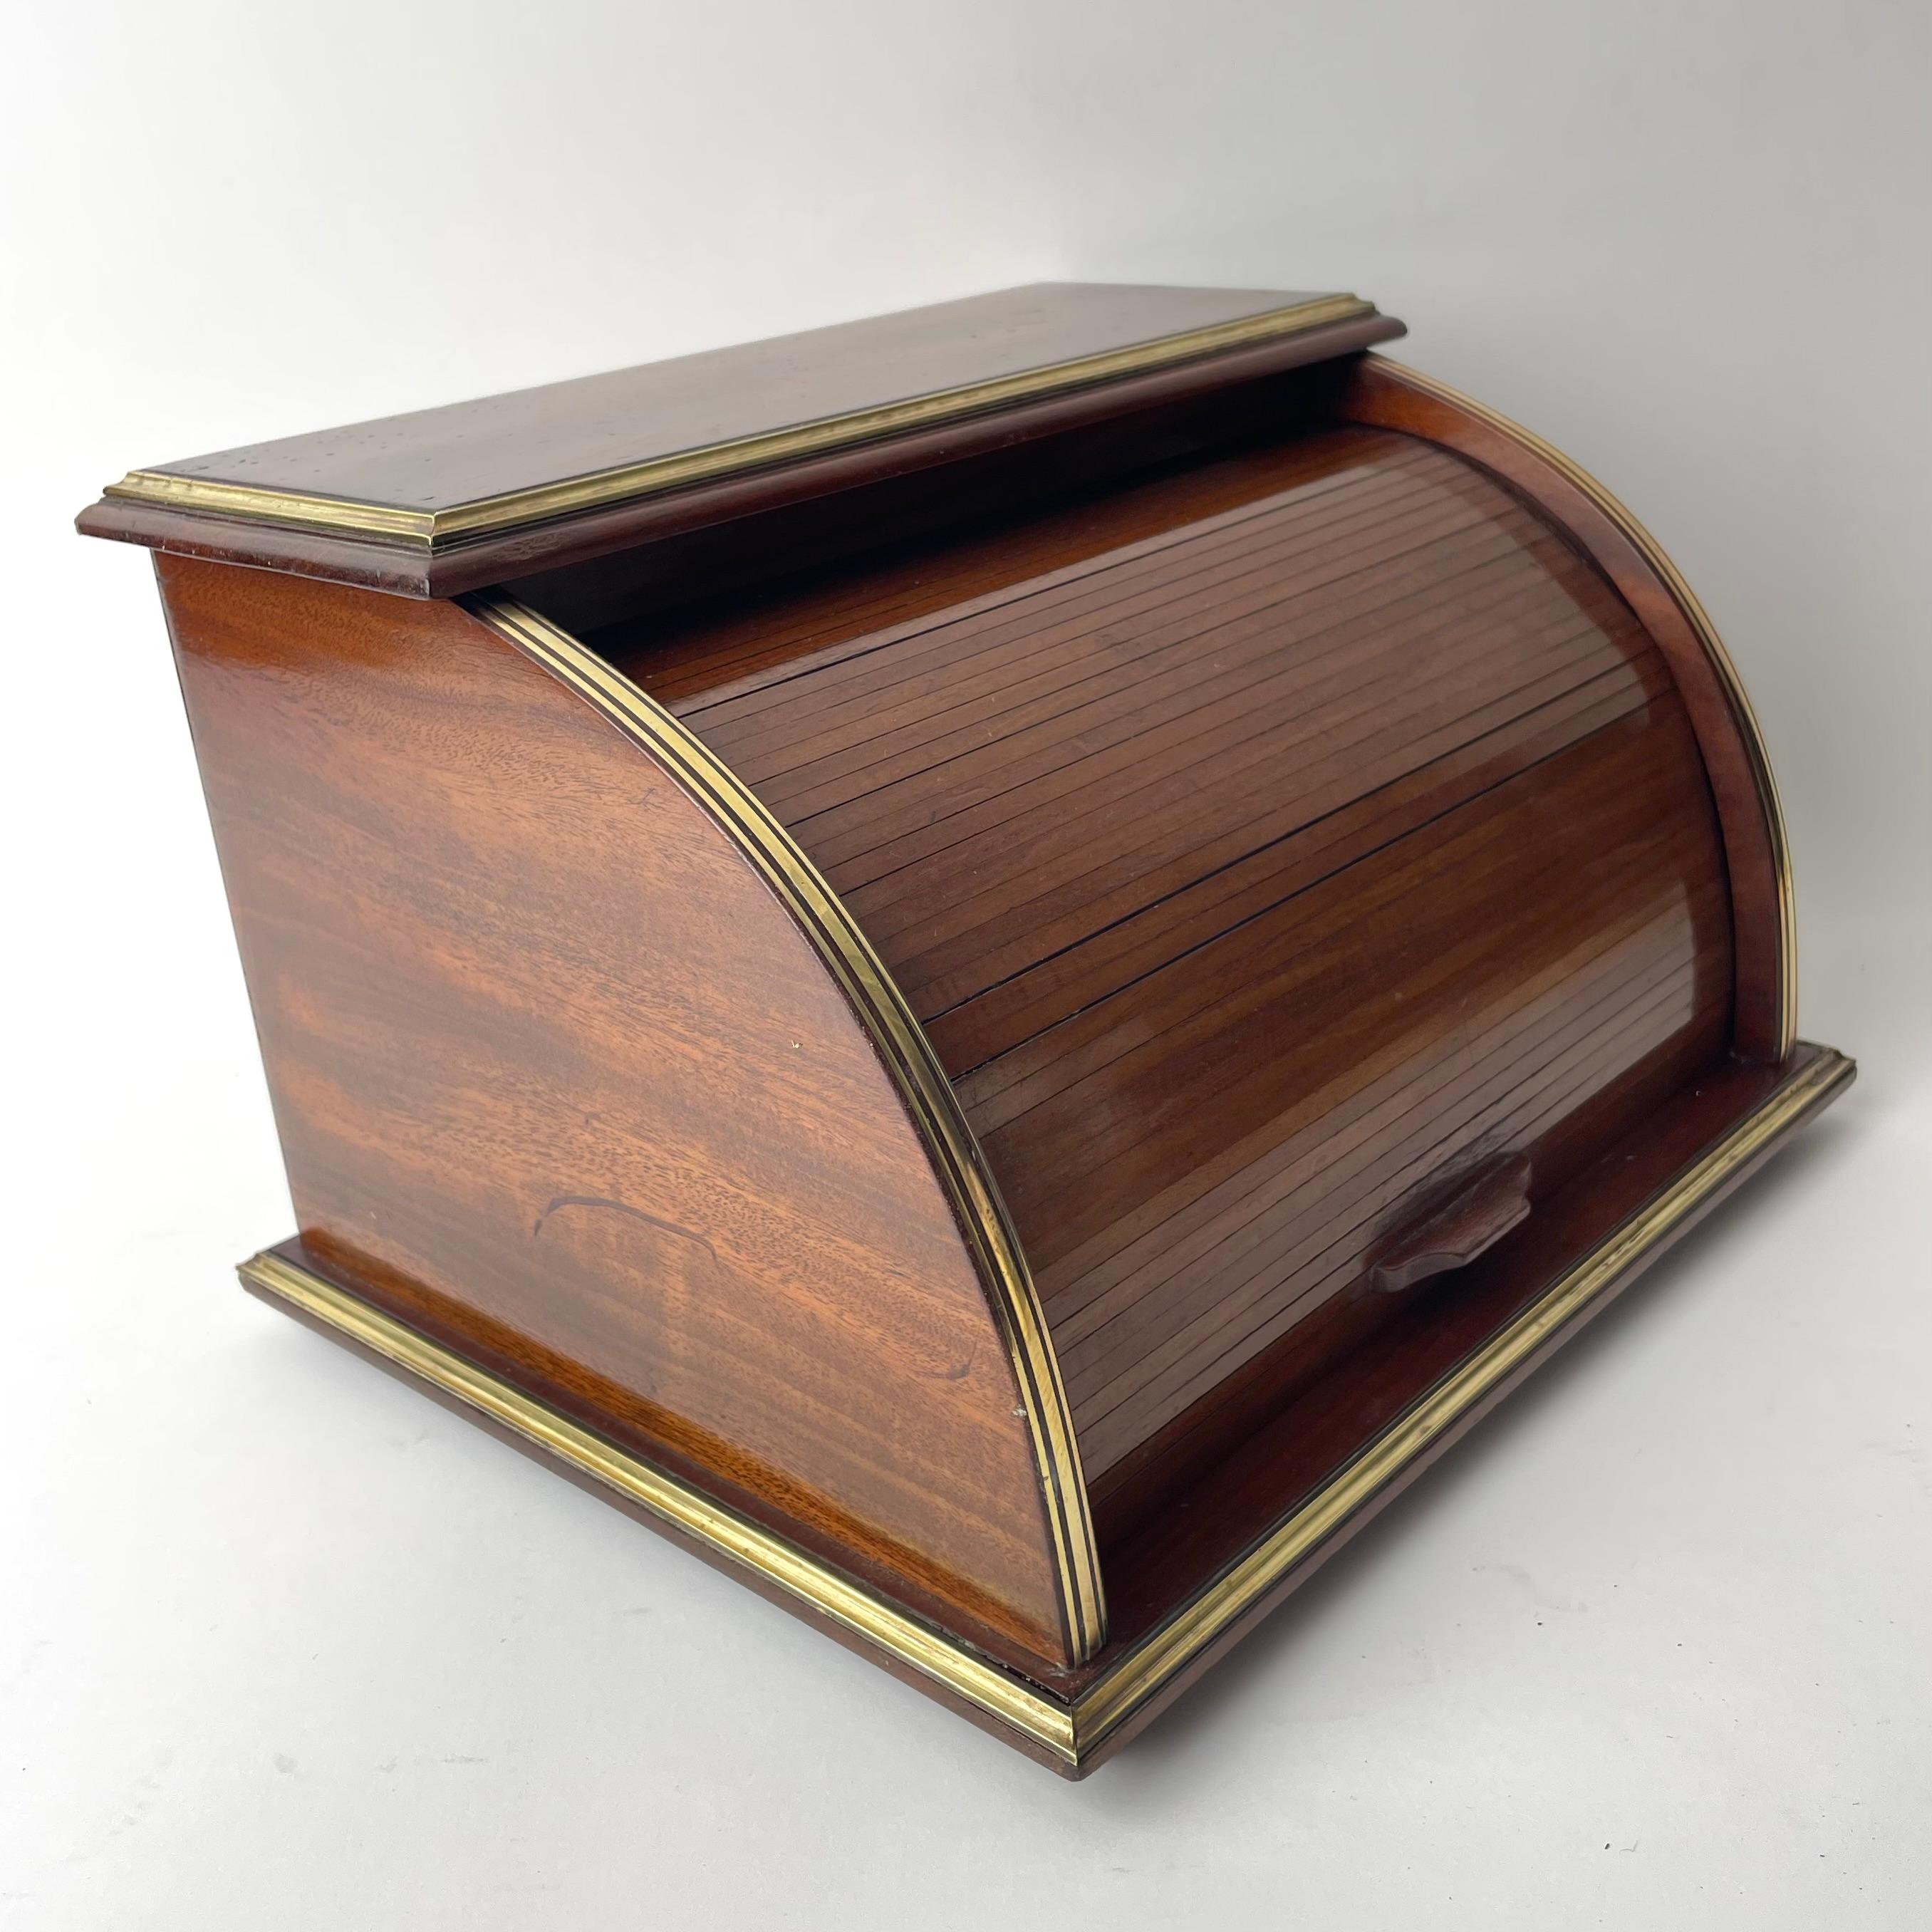 Letter Stand in Mahogany (Swietenia mahagoni) and Brass details. 

Closable by a rollable jalousie-like covering. The letter stand consists of a rounded main volume, made of mahogny (Swietenia mahagoni) and with brass details, which hold three